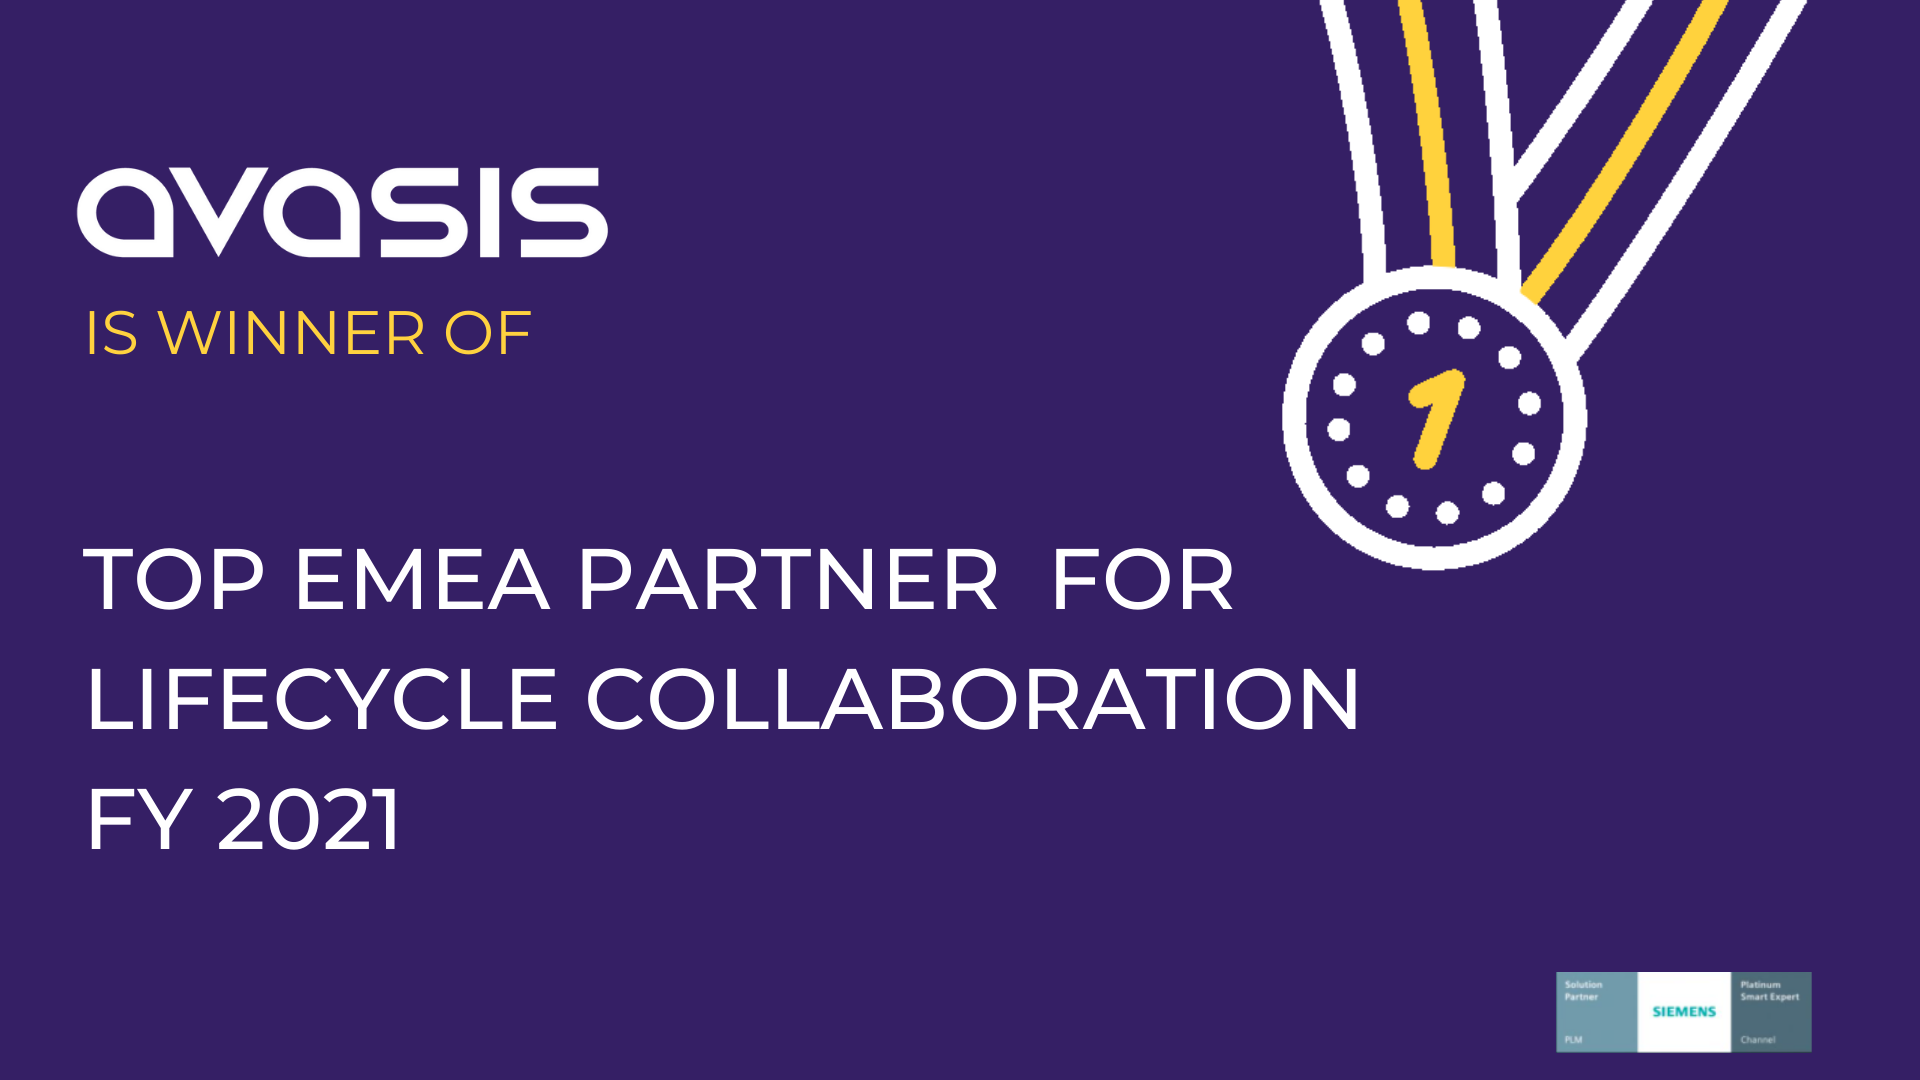 TOP EMEA PARTNER for Lifecycle Collaboration 2021